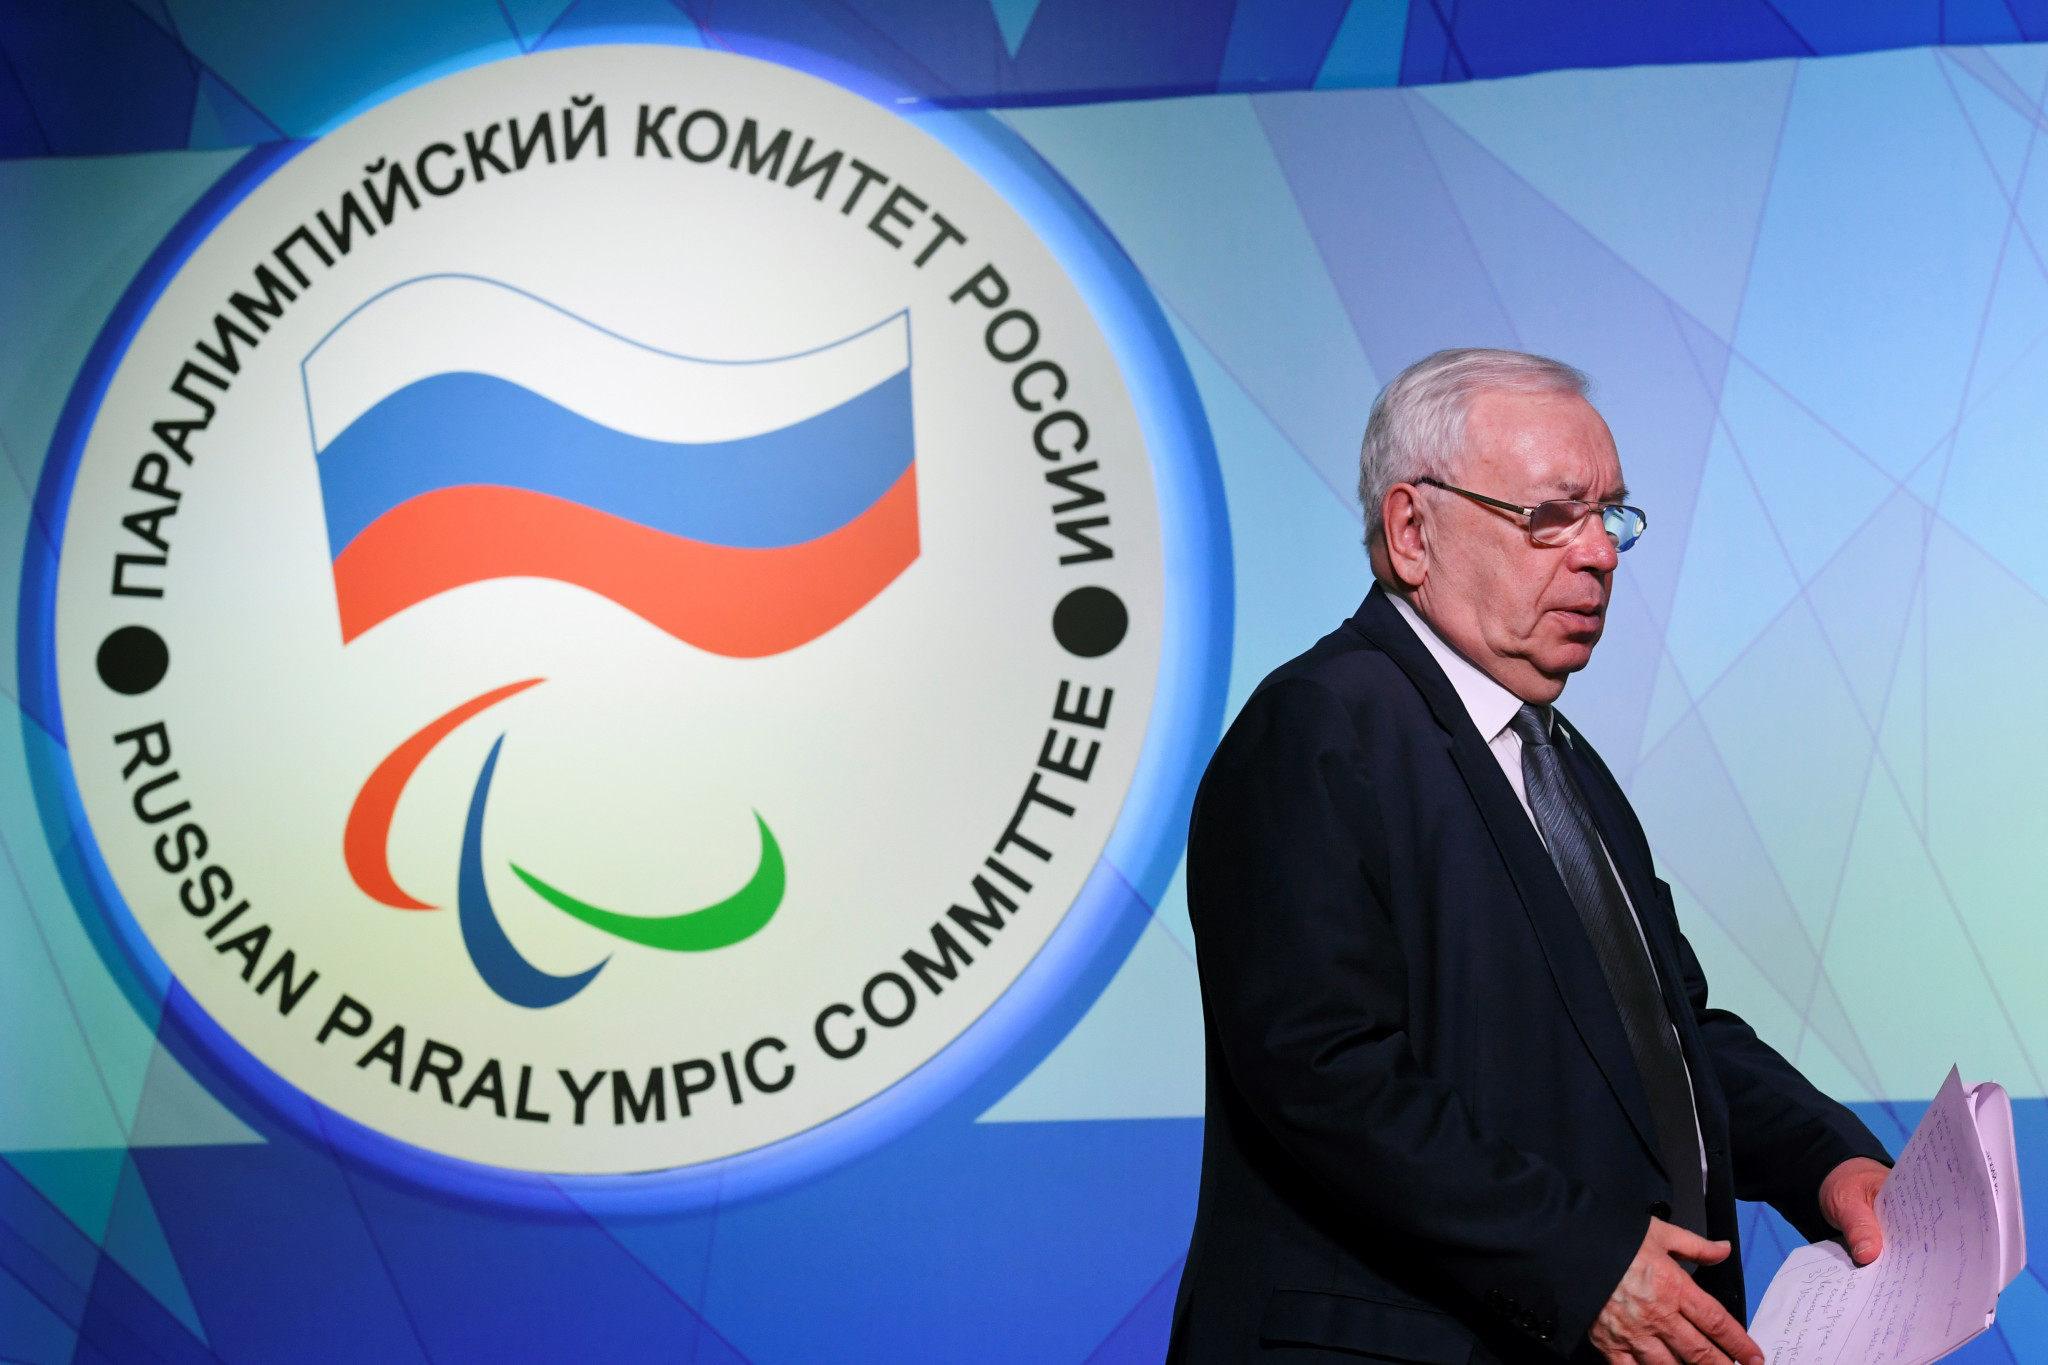 The Russian Paralympic Committee remains suspended by the International Paralympic Committee ©Getty Images